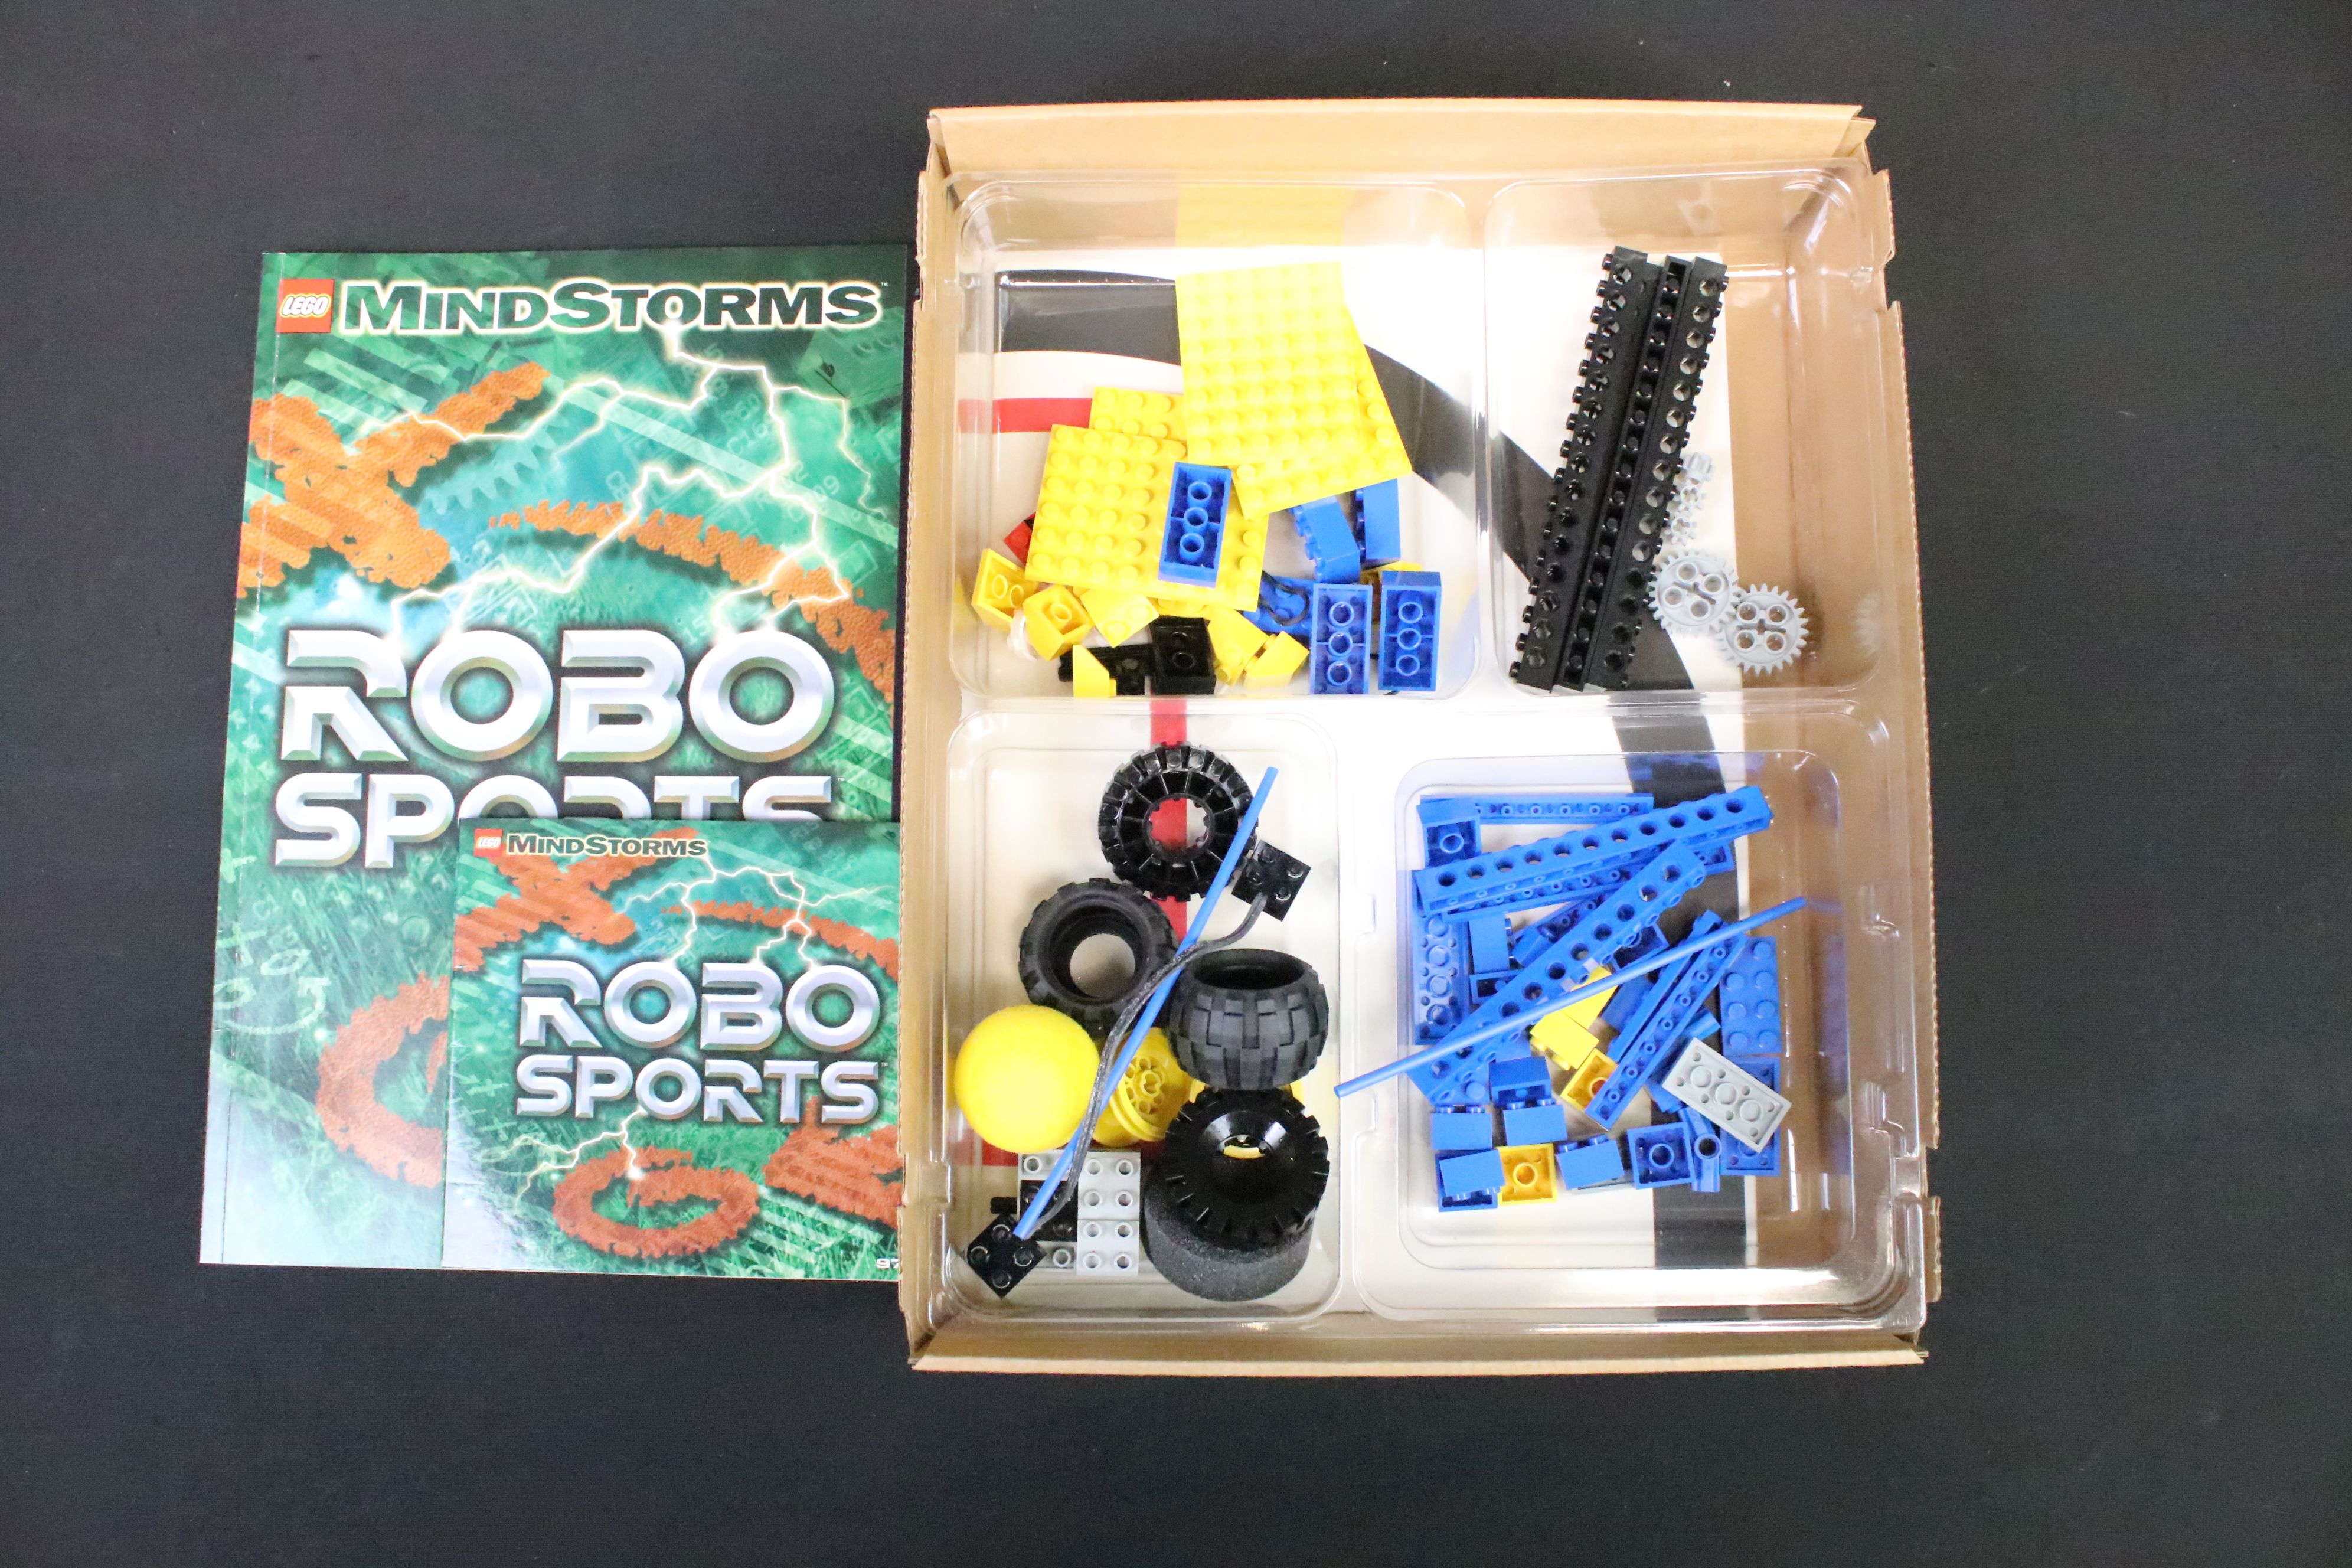 Collection of mixed toys and games to include Lego Mindstorms Robotic Inventions System and Lego - Image 16 of 16